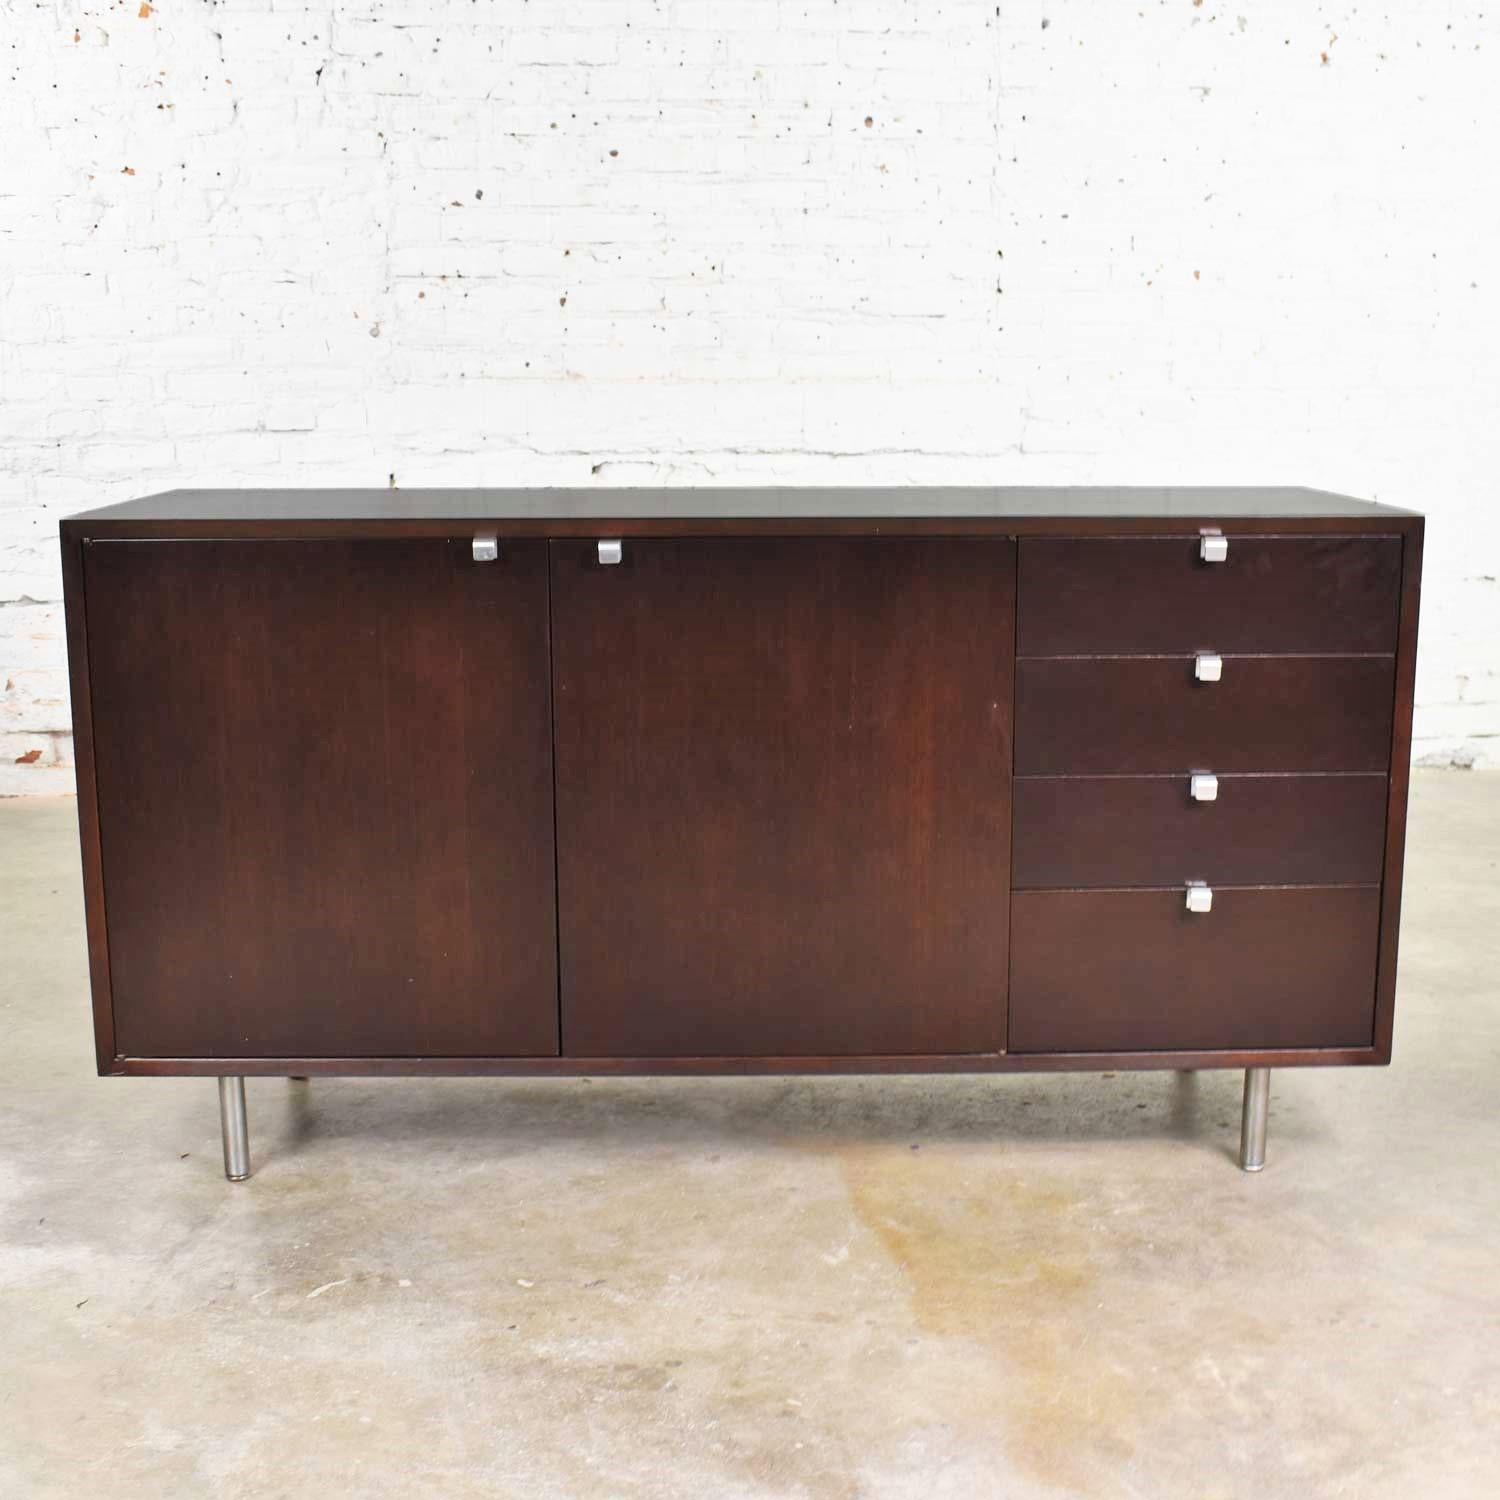 Handsome BCS Basic Cabinet Series sideboard or credenza in walnut designed by George Nelson for Herman Miller. This cabinet is in fabulous condition. It was restored prior to us acquiring and has been used a little since; so, there are some small